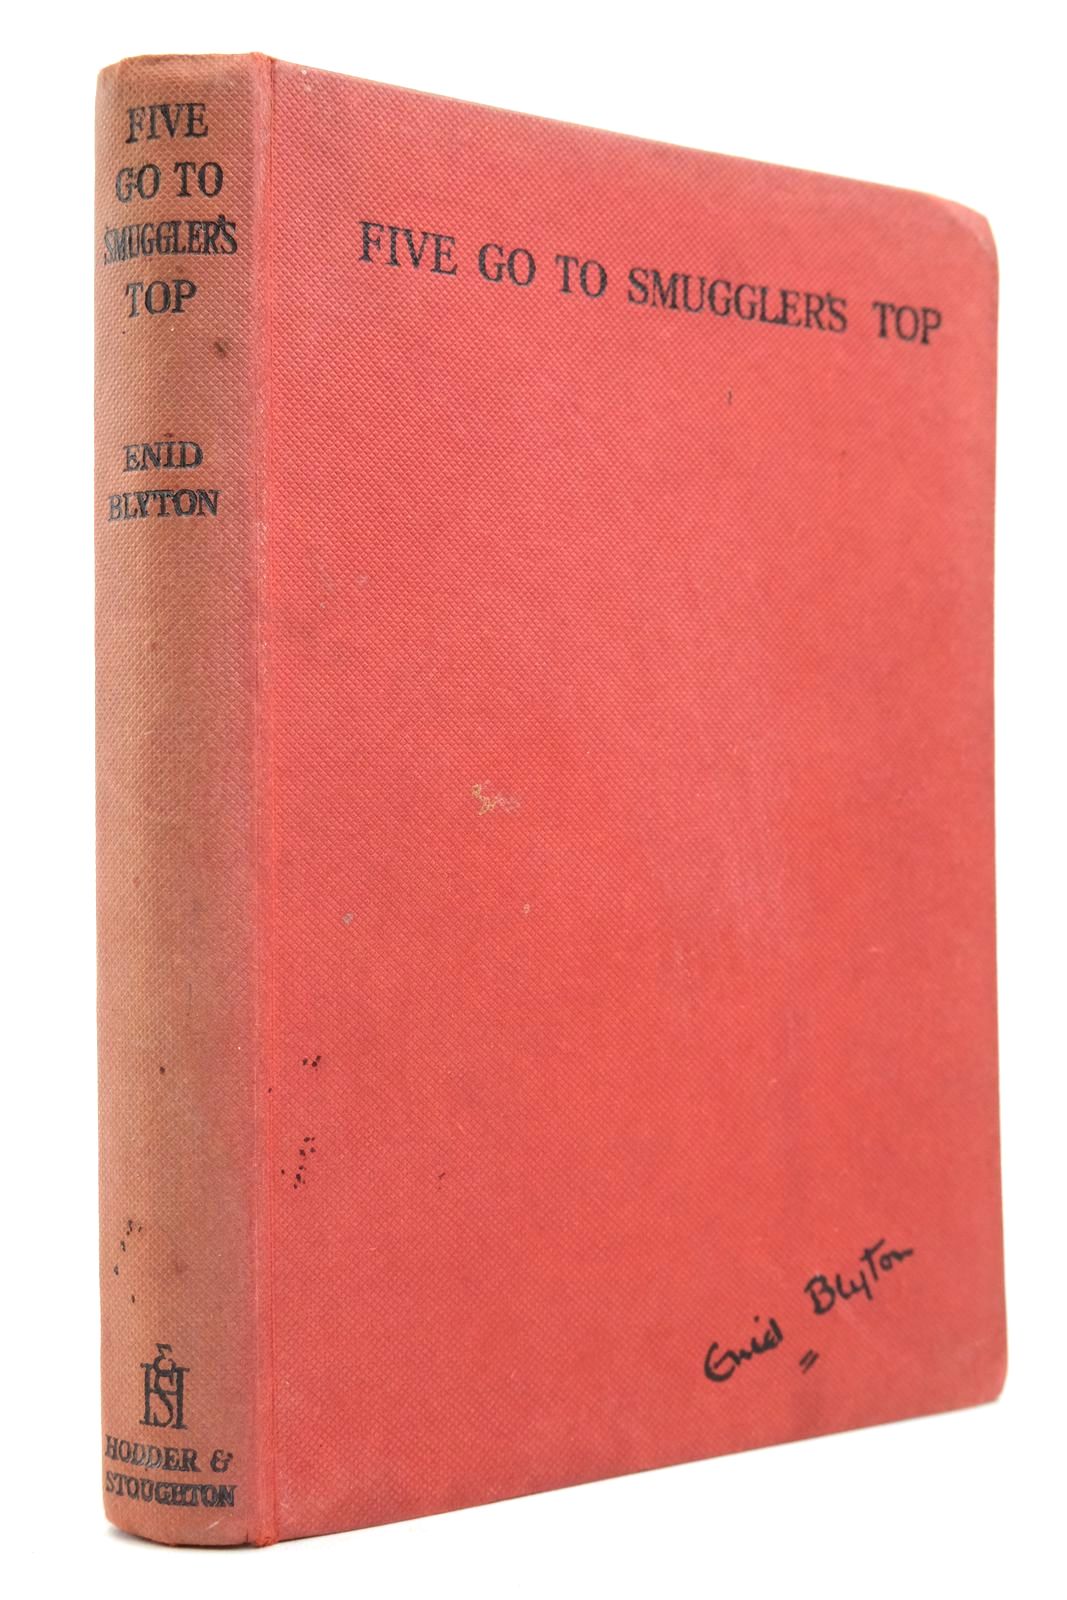 Photo of FIVE GO TO SMUGGLER'S TOP written by Blyton, Enid illustrated by Soper, Eileen published by Hodder &amp; Stoughton (STOCK CODE: 2140488)  for sale by Stella & Rose's Books